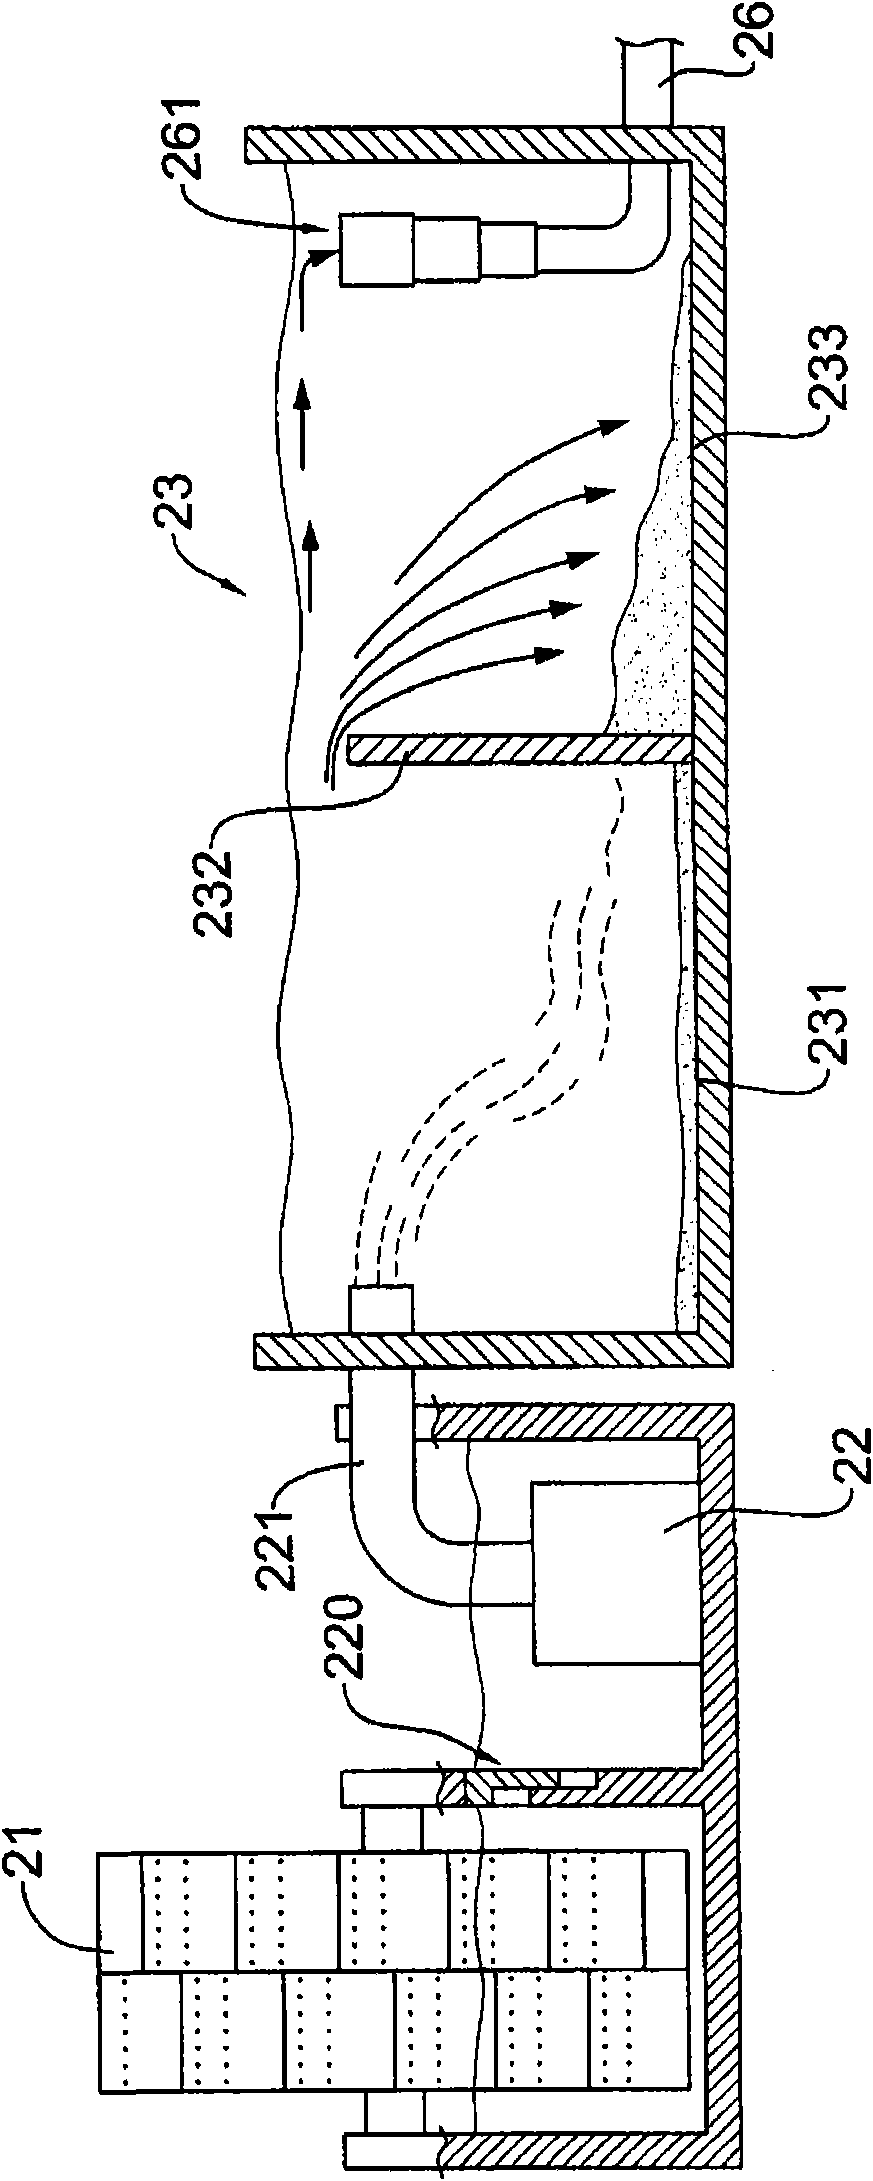 Device and method for post treatment of slag mud